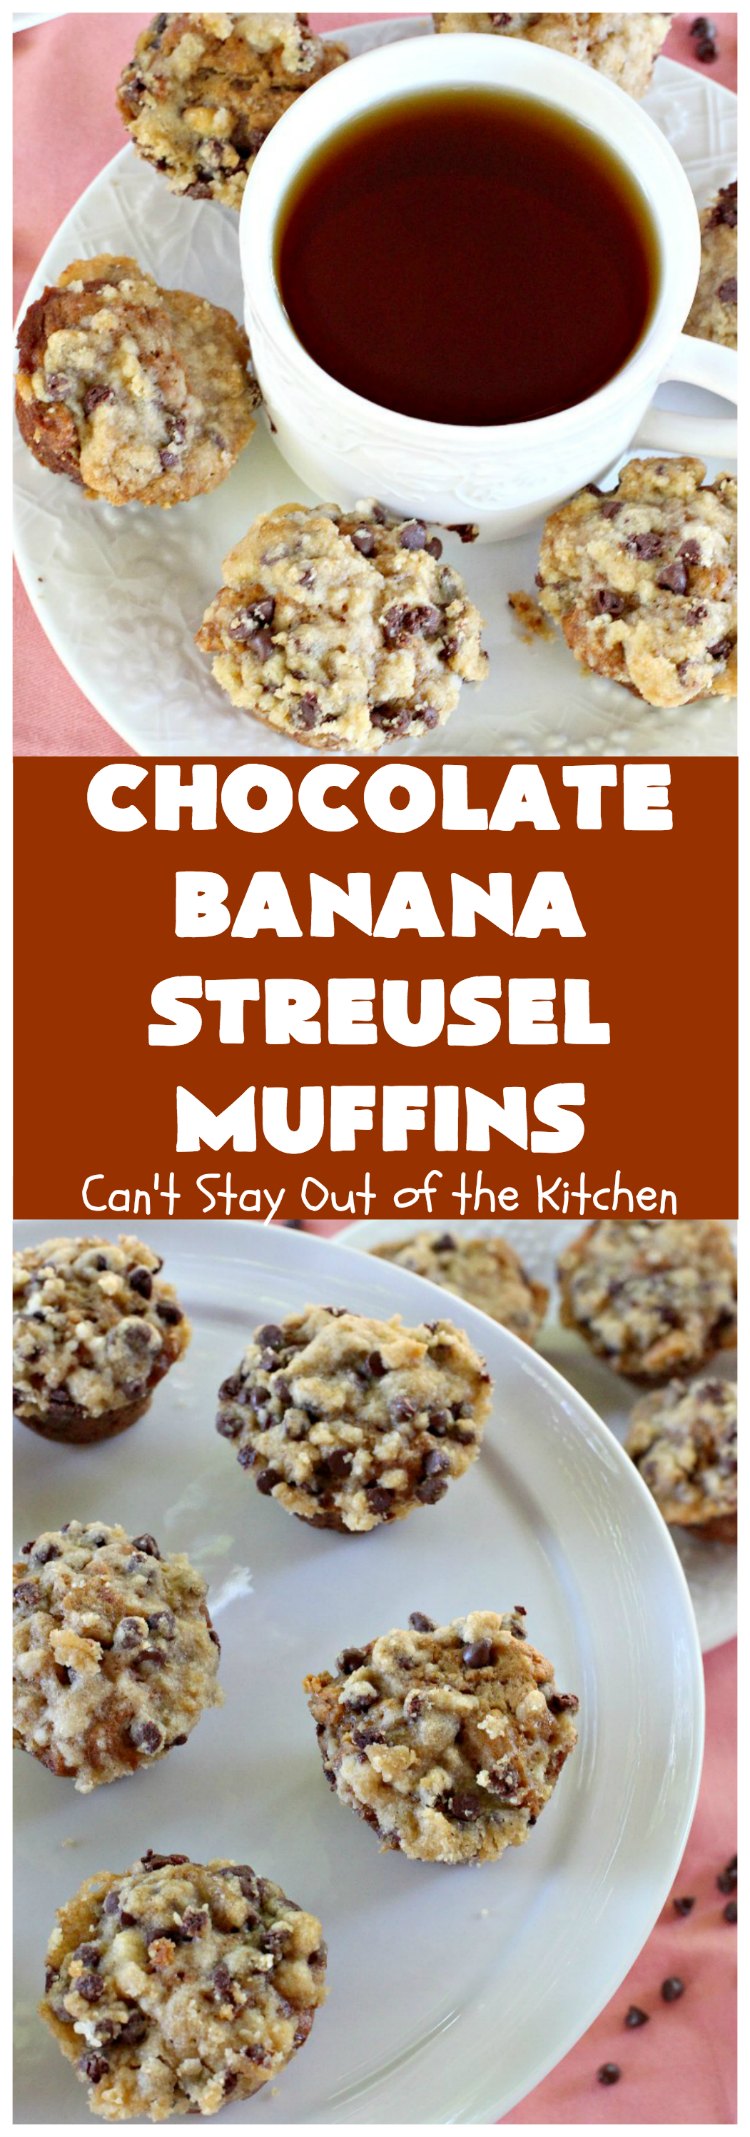 Chocolate Banana Streusel Muffins | Can't Stay Out of the Kitchen